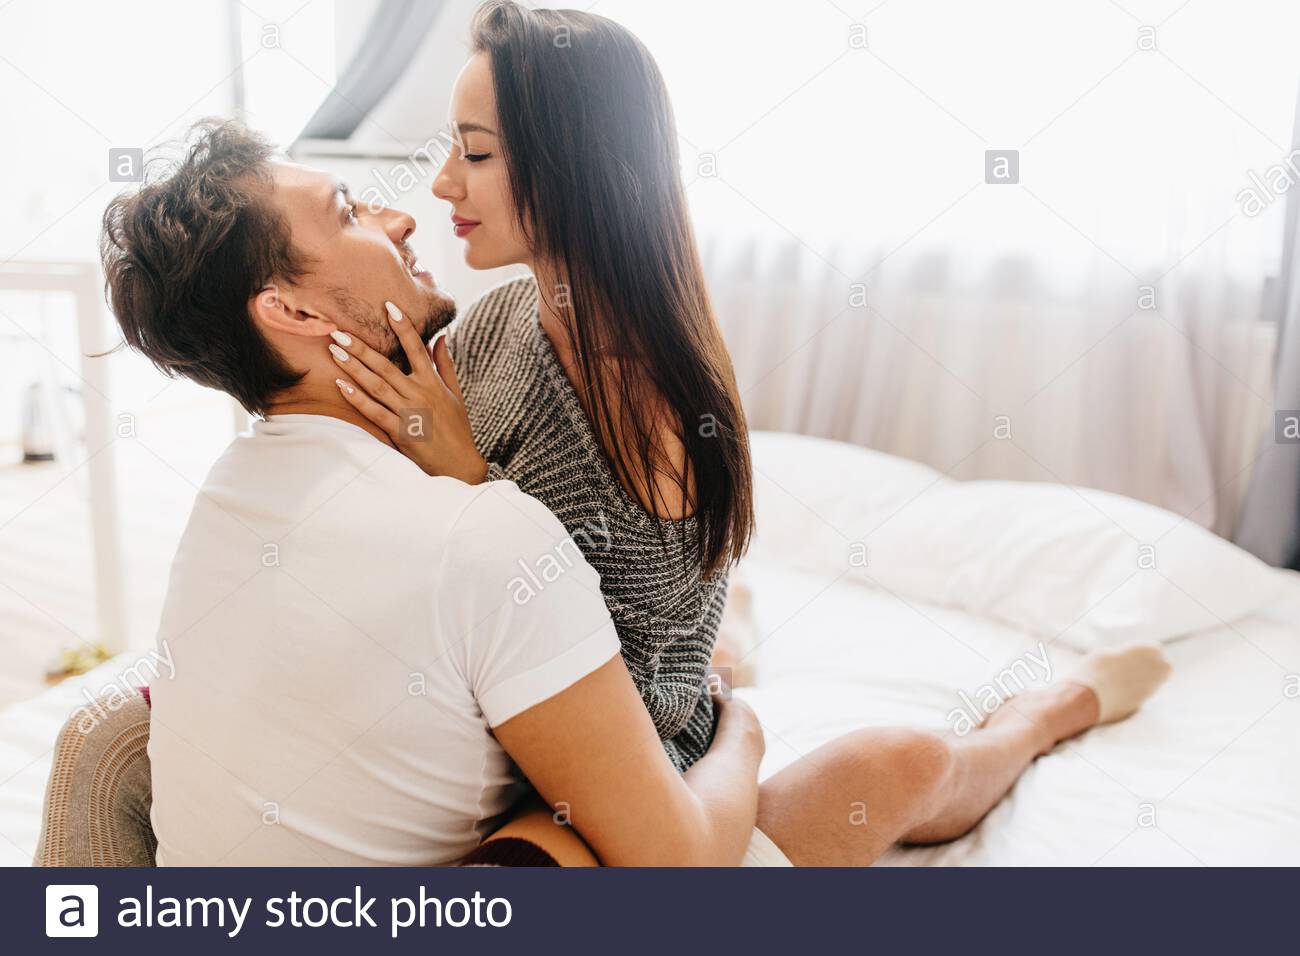 Couple Bed Bedroom Kiss Love Romance Hugging High Resolution Stock Photography And Images Alamy